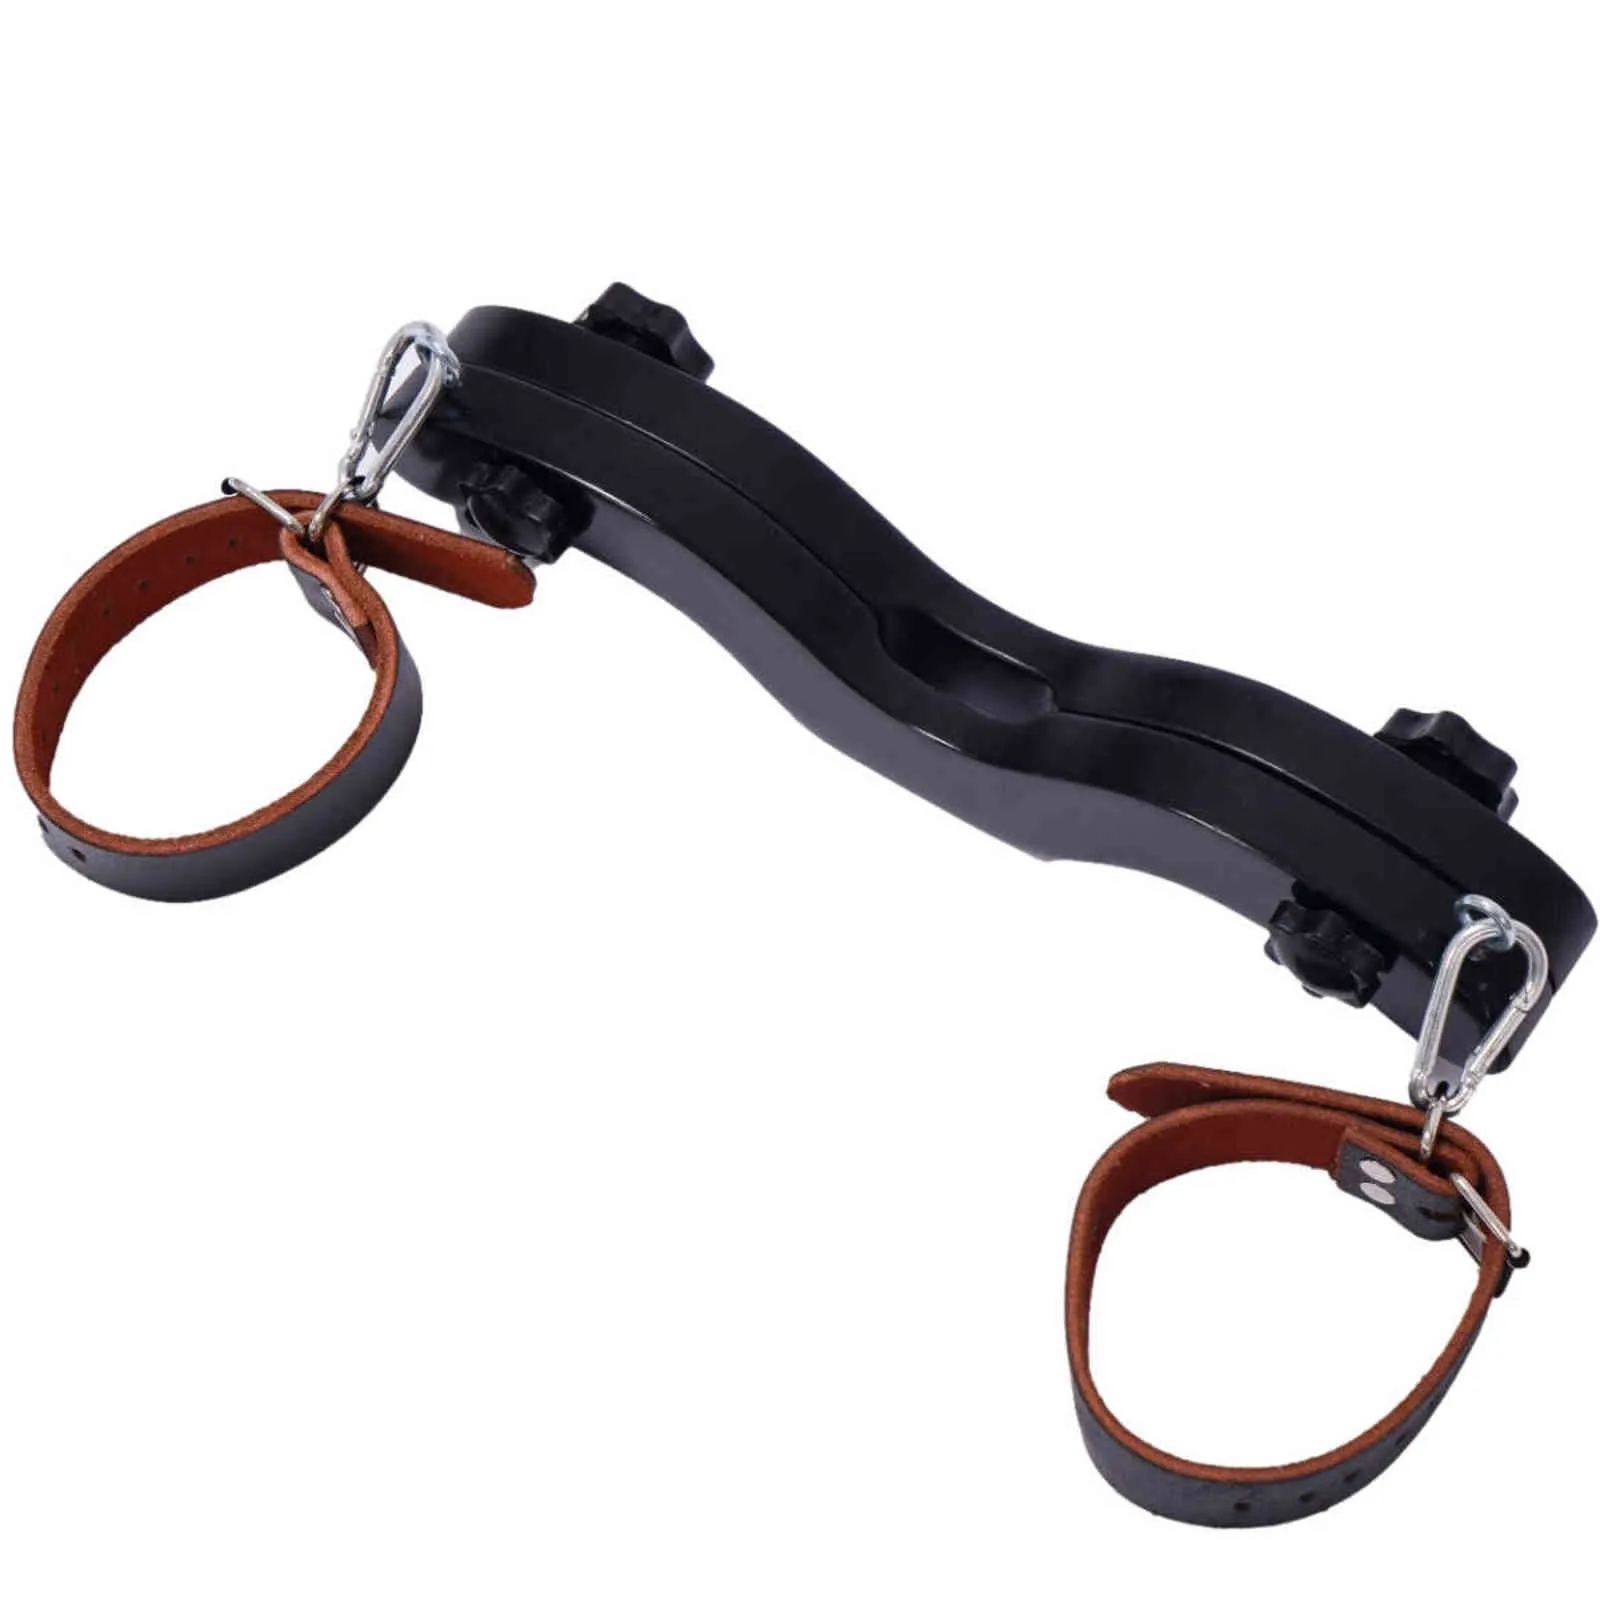 NXY Cockrings Black Wood BDSM Enforcer Humbler Set Cock & Ball Torture with Cuffs Sex Toy for Man Scrotal Fixture CBT Stretcher Smasher 1124